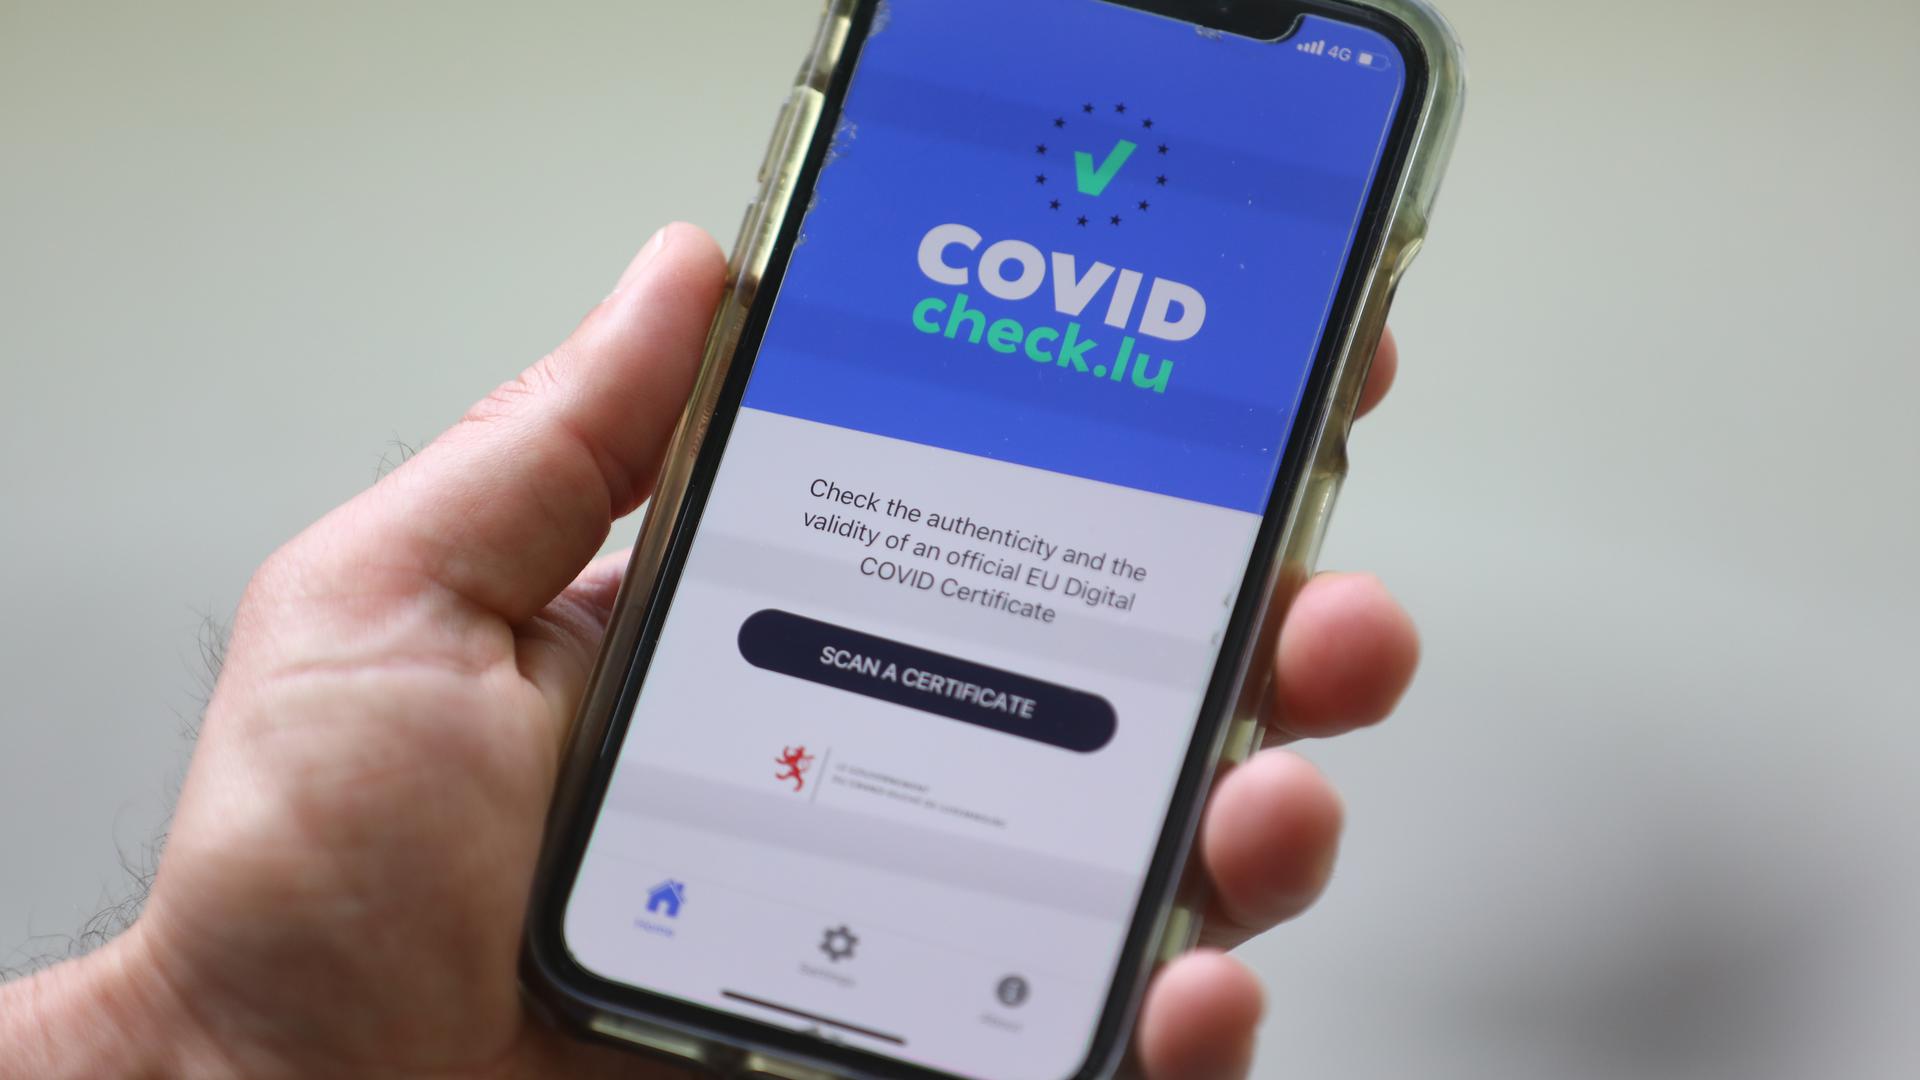 The new Covid legislation, which will put to a vote in parliament on Monday, proposes extending the CovidCheck scheme to the workplace